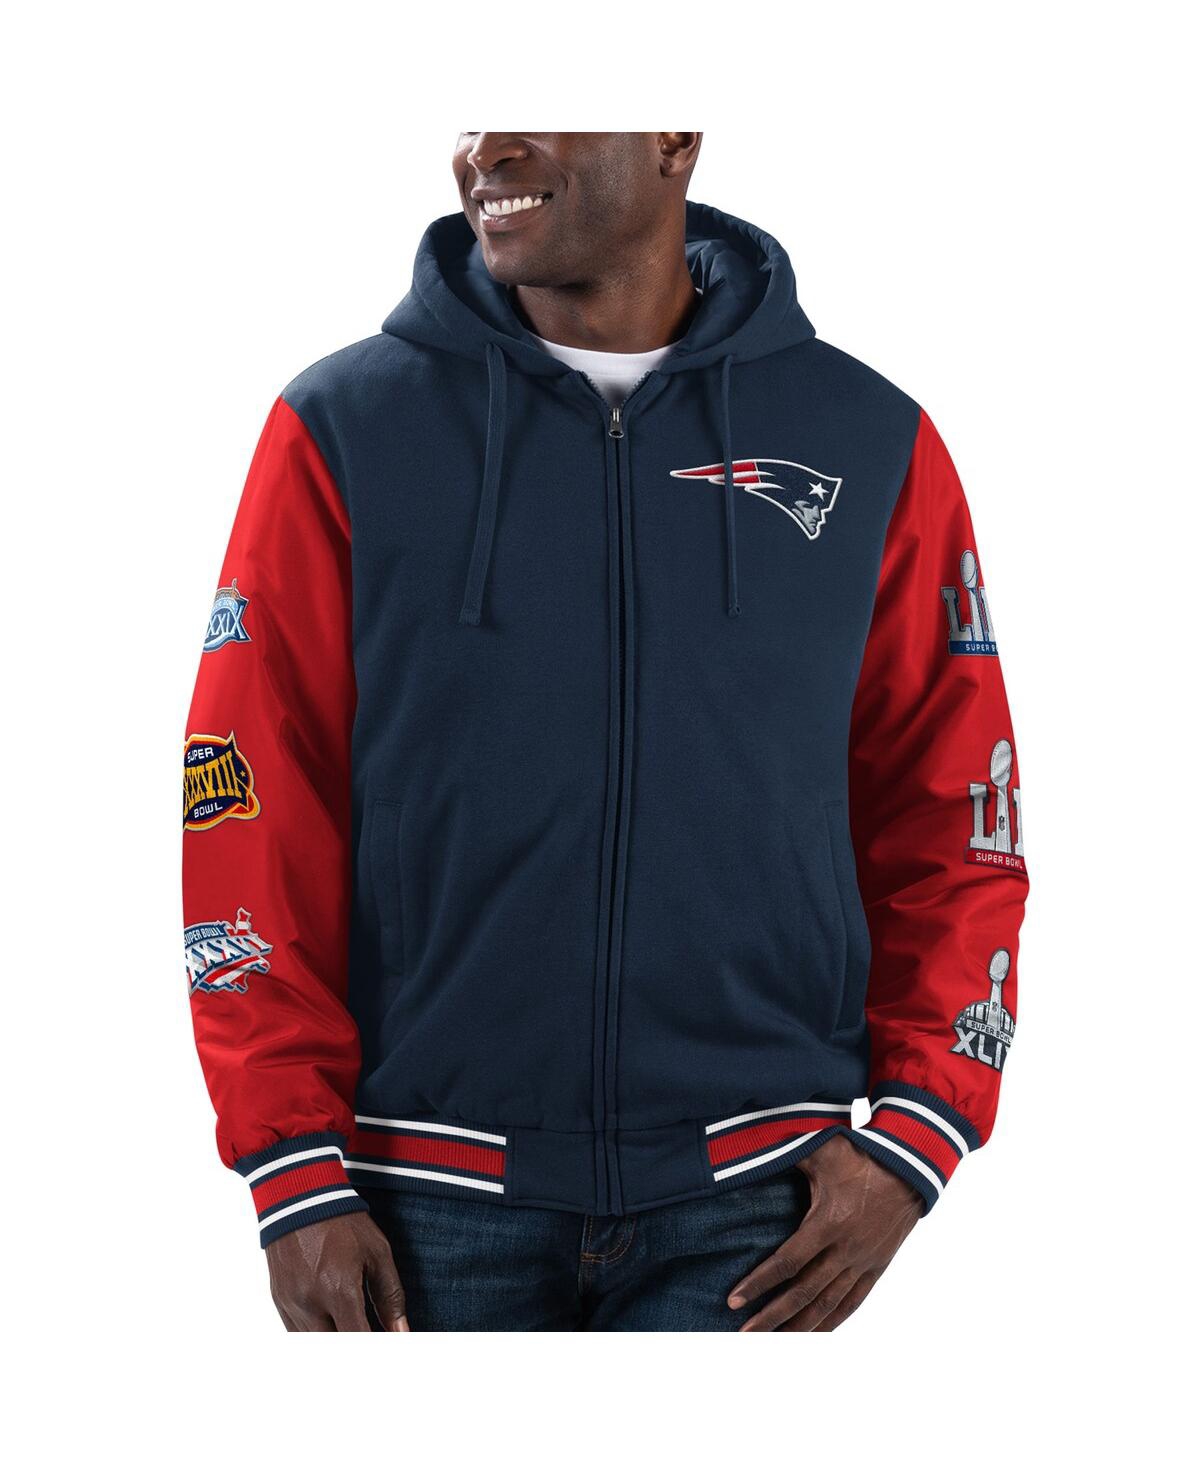 Men's G-iii Sports by Carl Banks Navy, Red New England Patriots Player Option Full-Zip Hoodie Jacket - Navy, Red